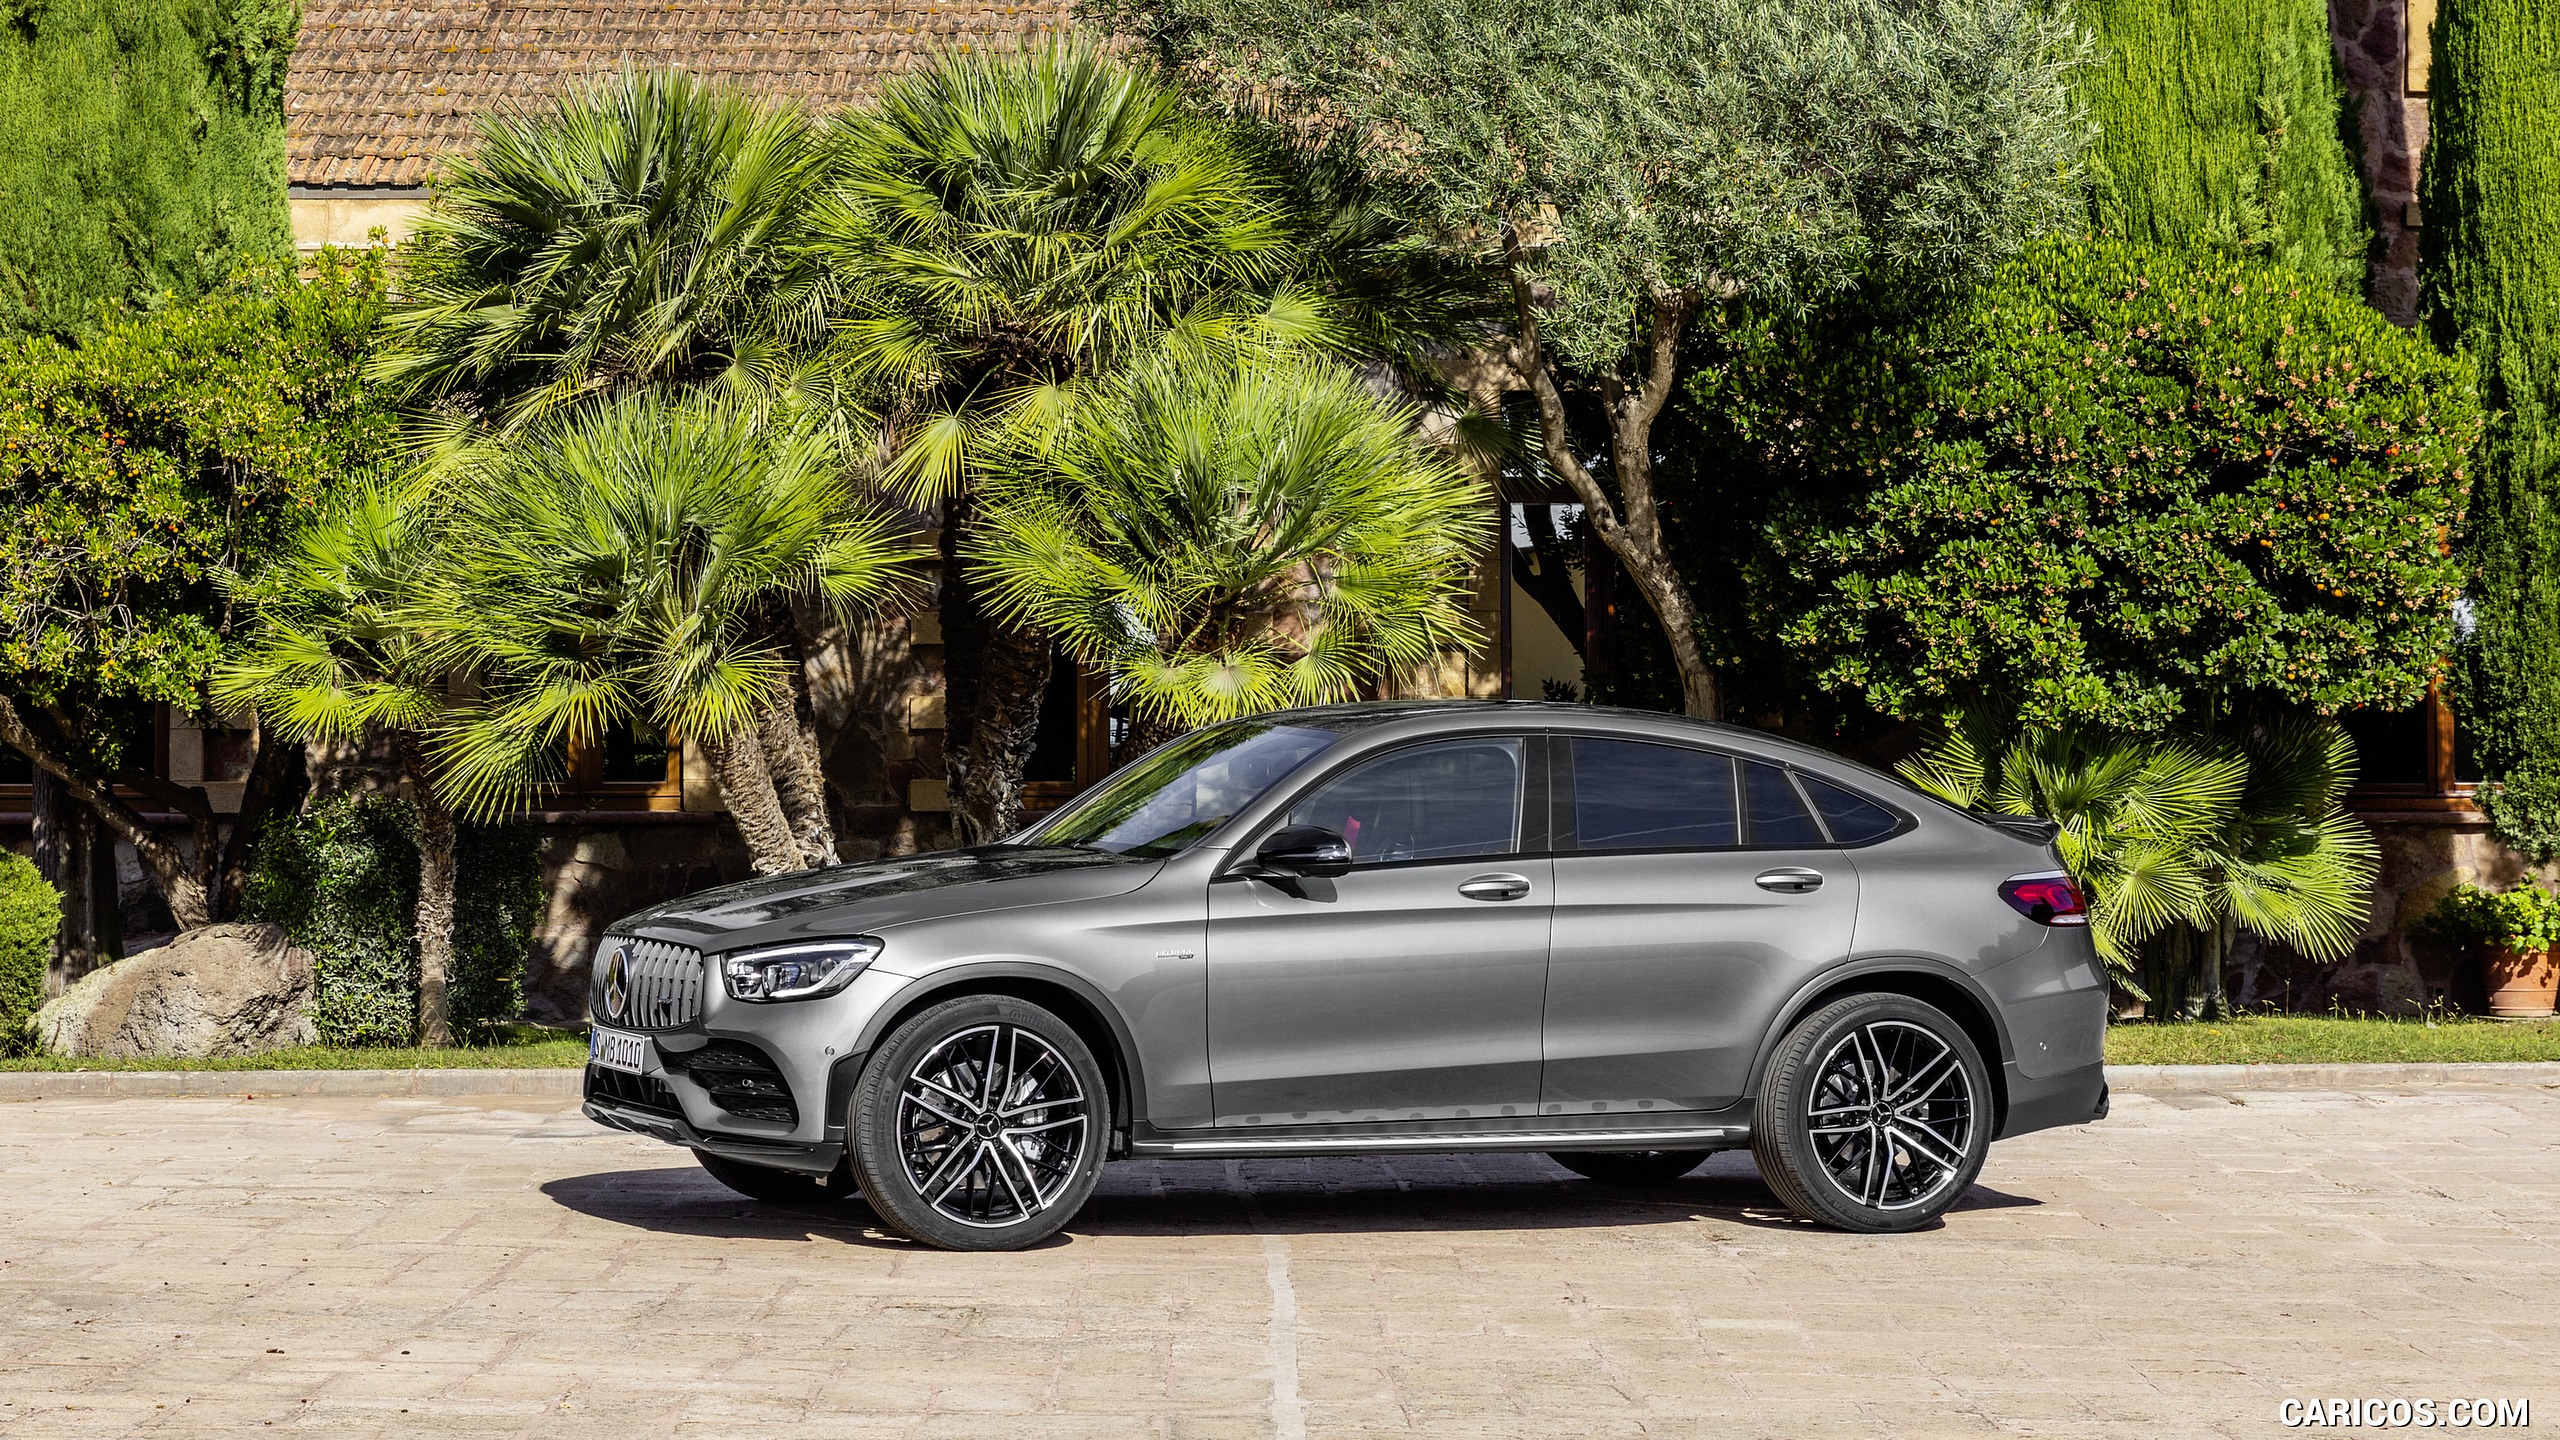 2020 Mercedes-AMG GLC 43 4MATIC Coupe - Side, #14 of 173